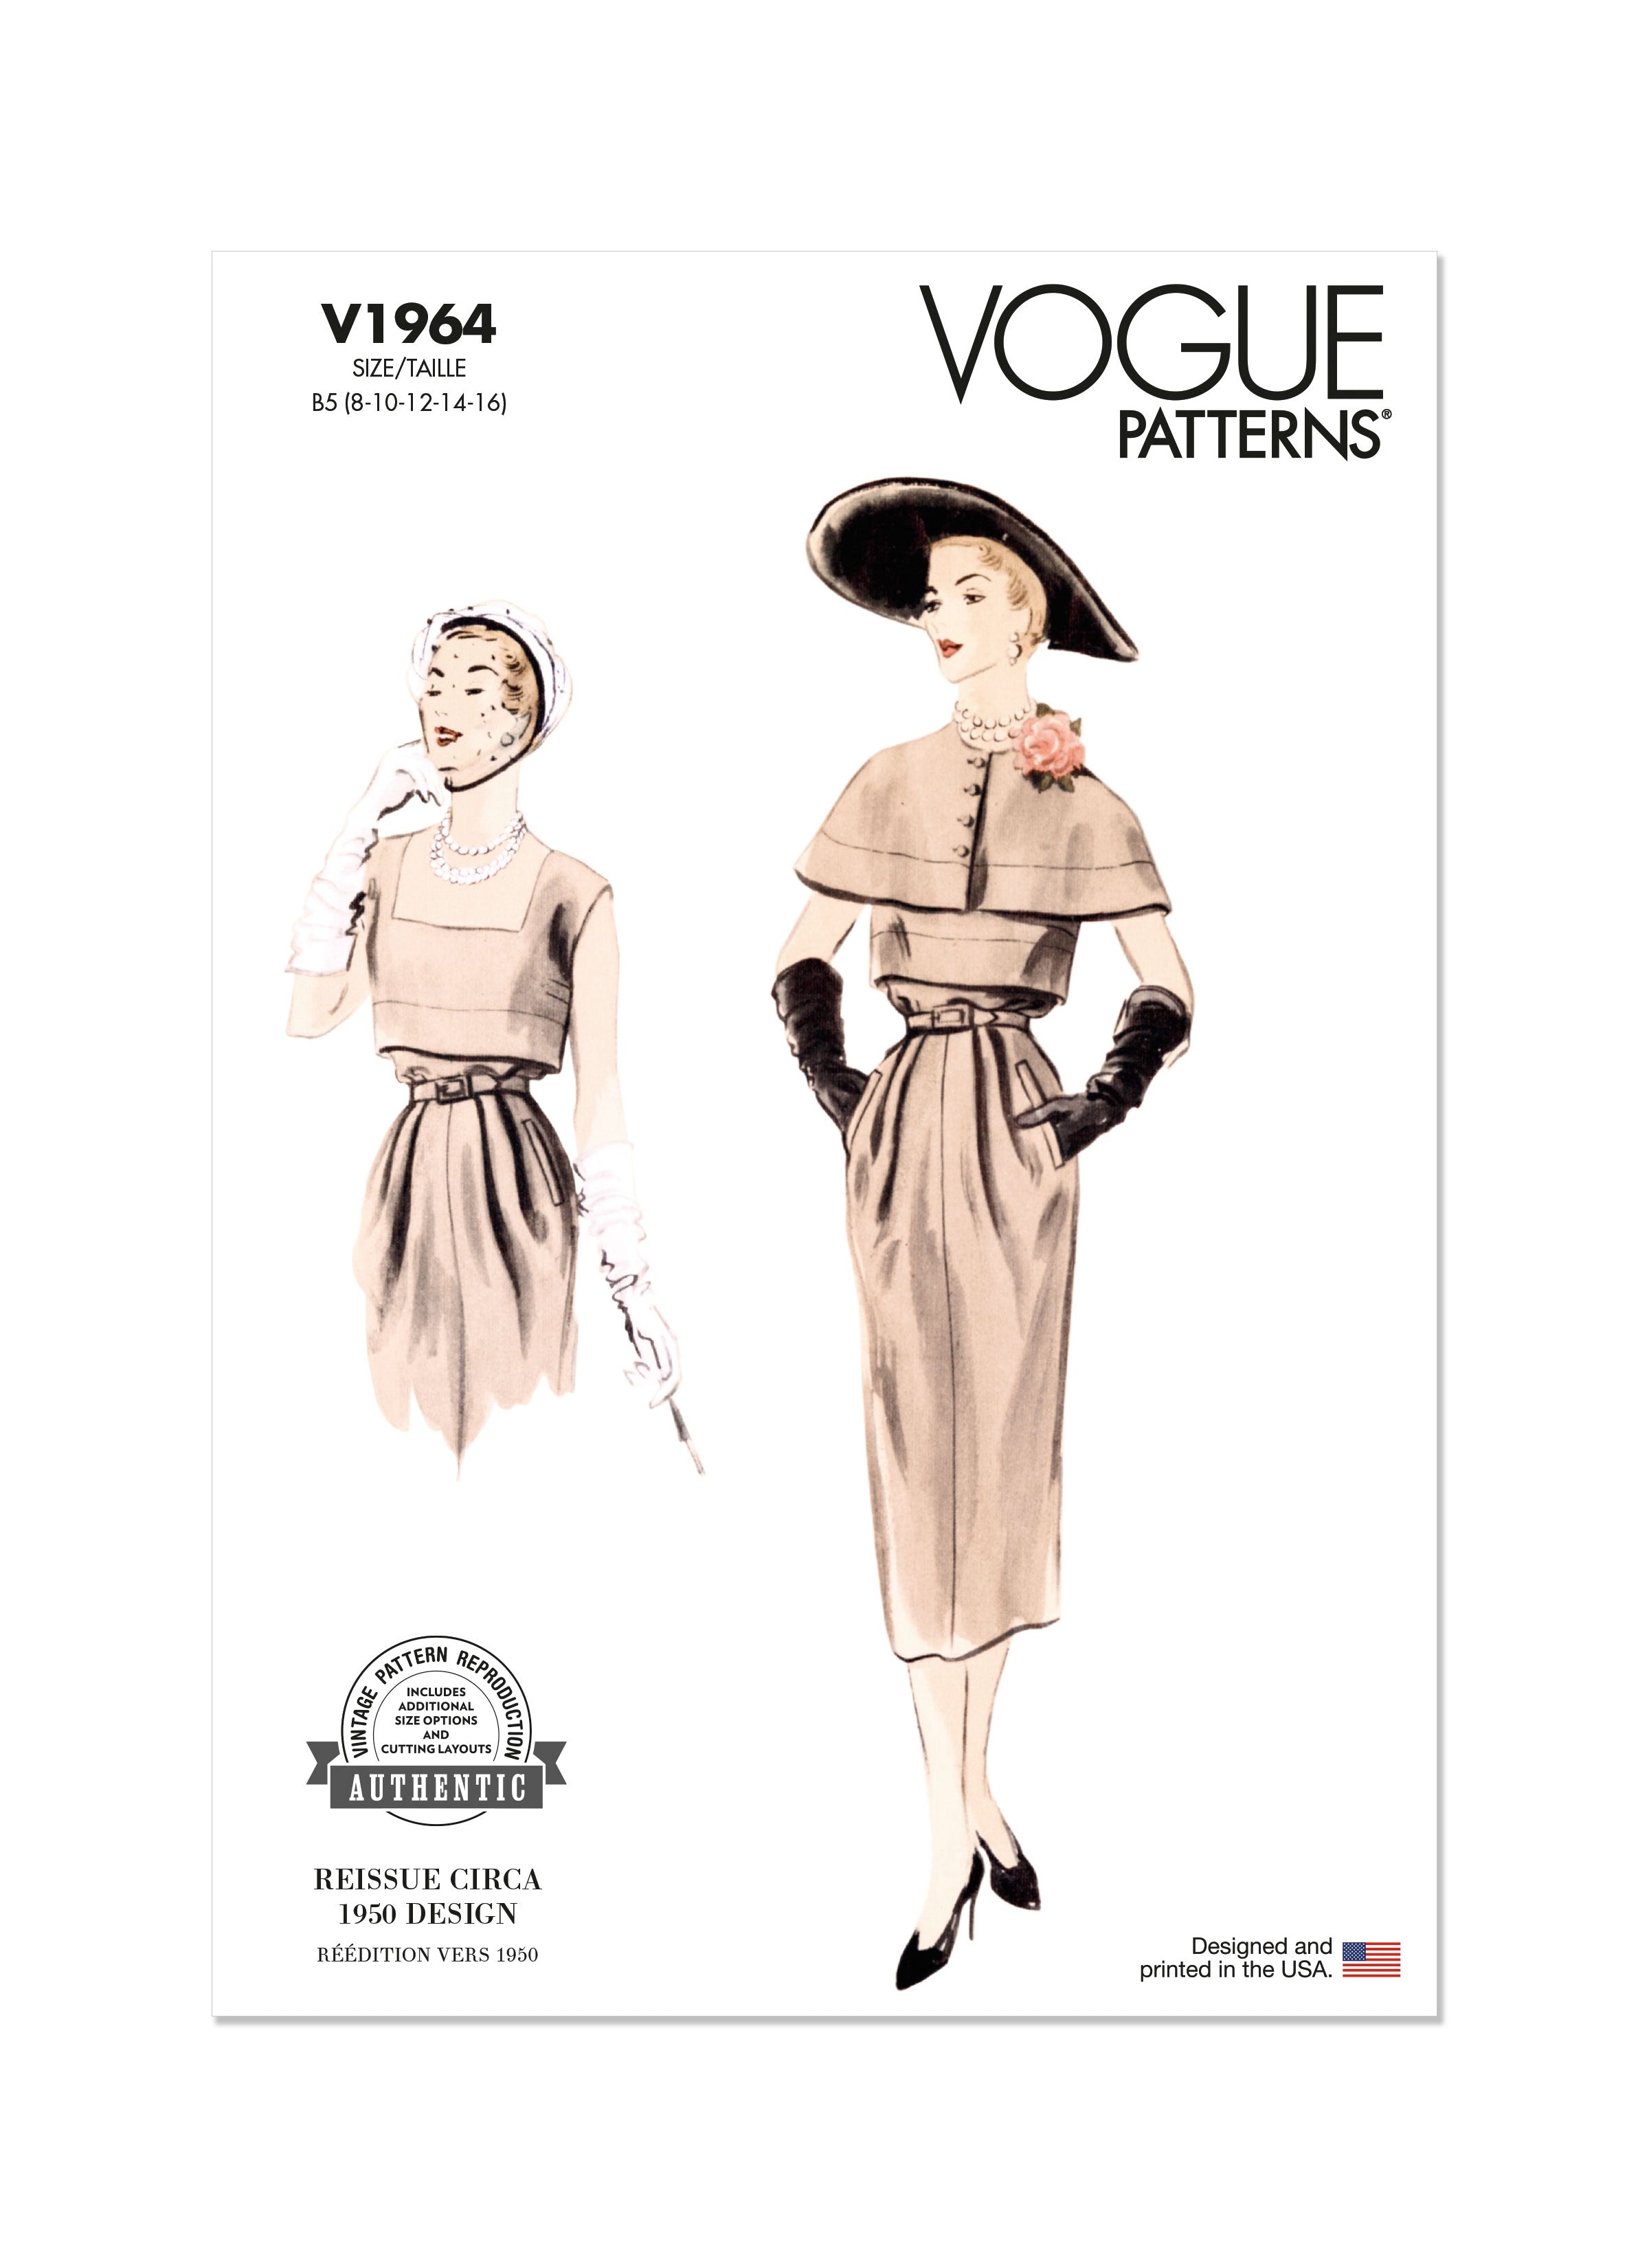 Vogue Sewing Pattern 1964 Misses' Dress and Capelet from Jaycotts Sewing Supplies